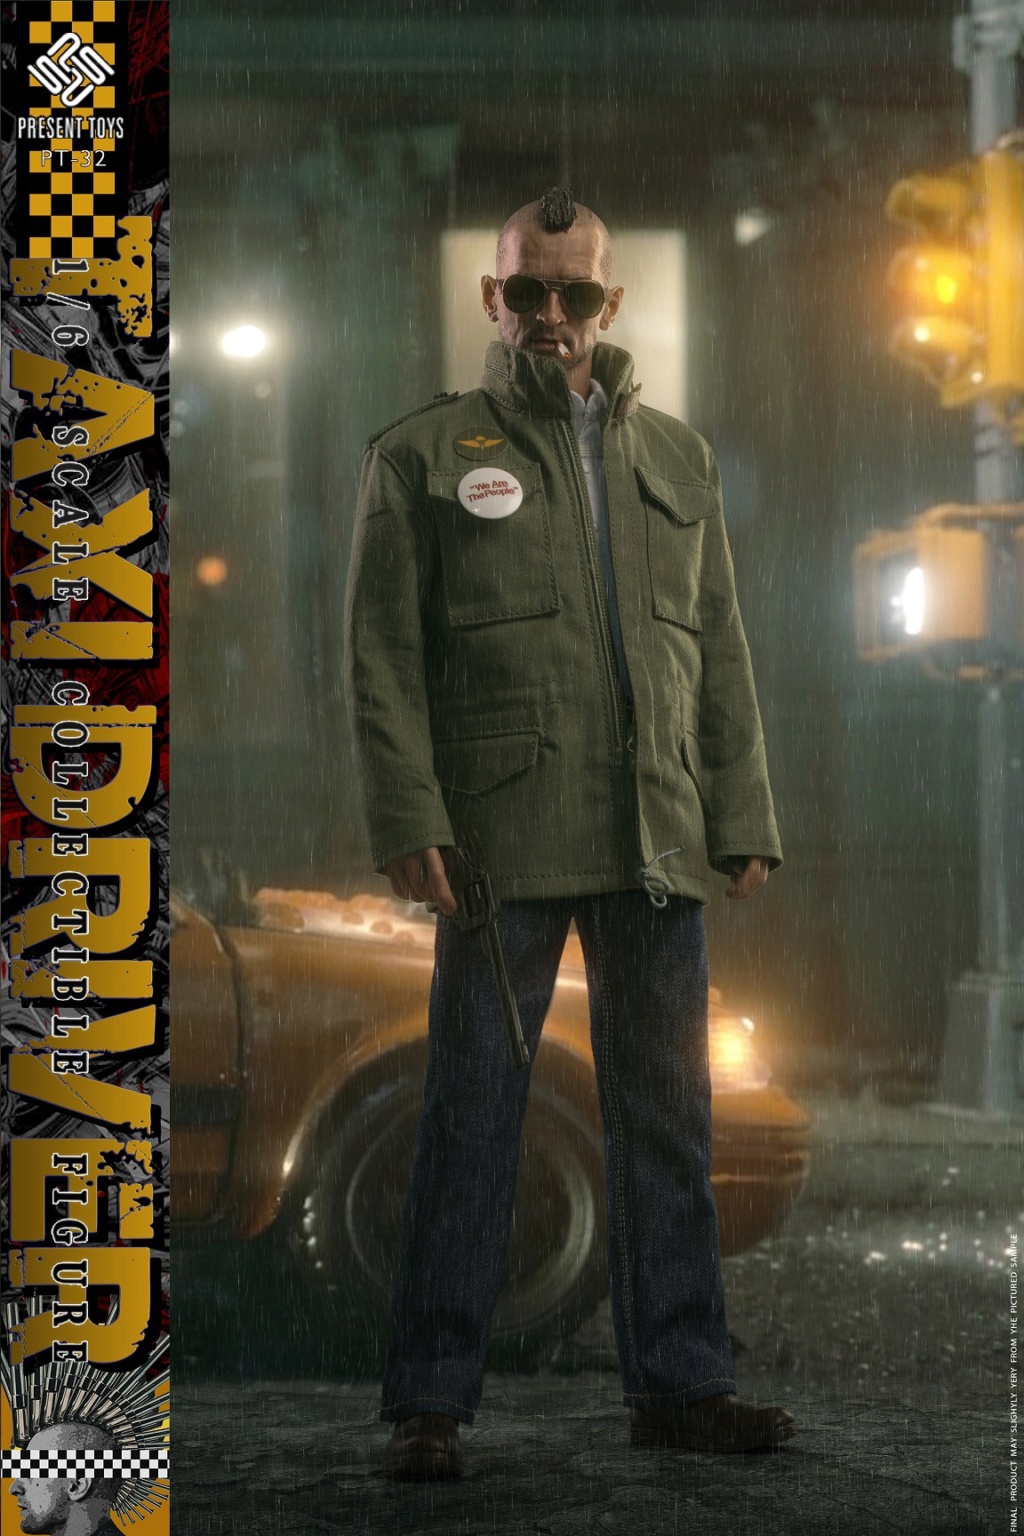 crimedrama - NEW PRODUCT: Present Toys: 1/6 "Taxi Driver" Collection Doll#PT-sp32 18193110